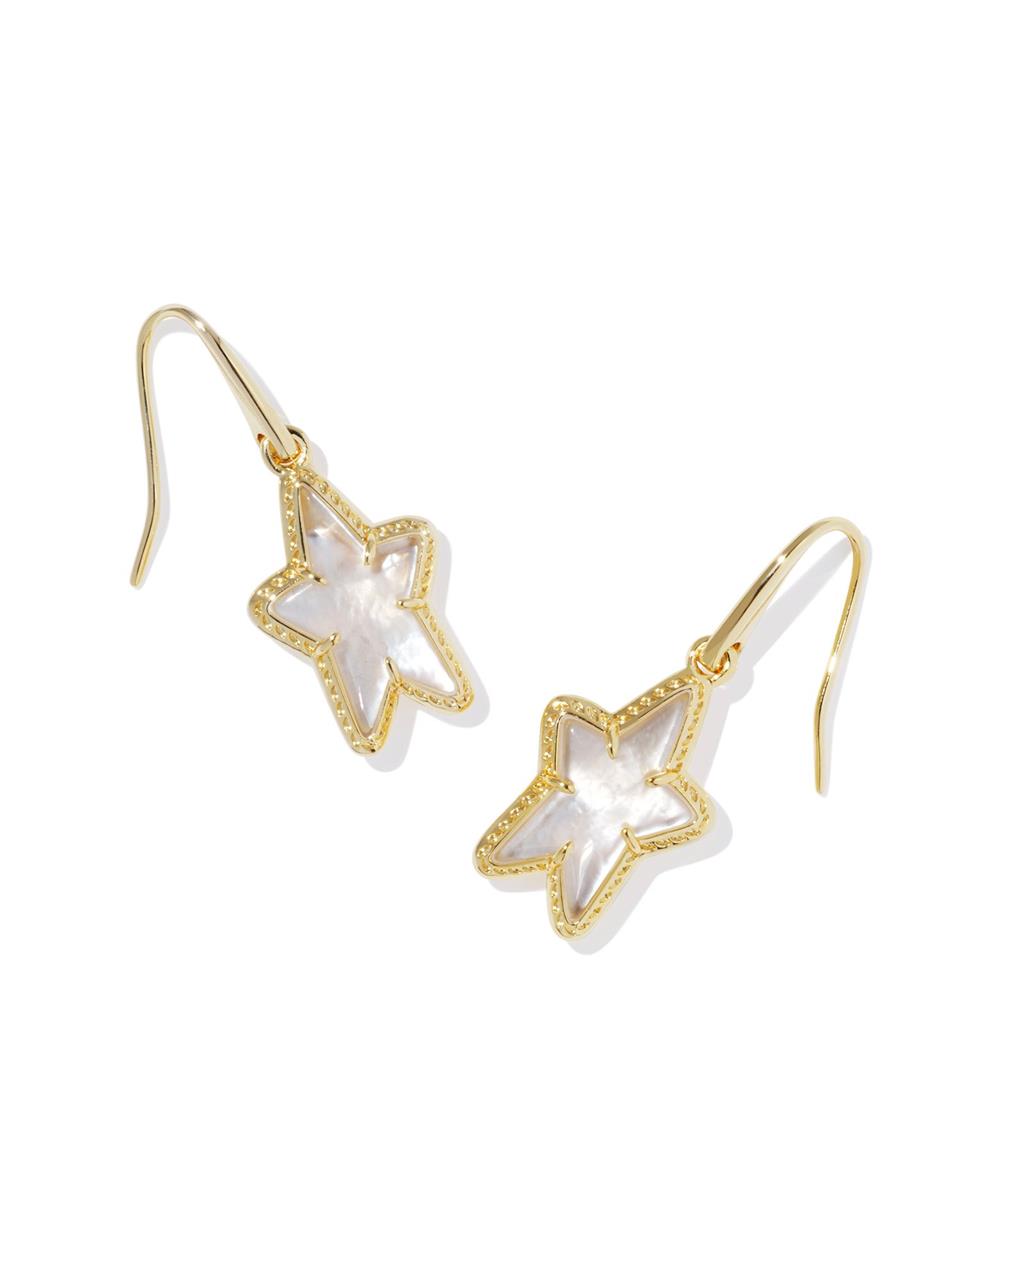 ADA STAR SMALL DROP EARRINGS GOLD IVORY MOTHER OF PEARL